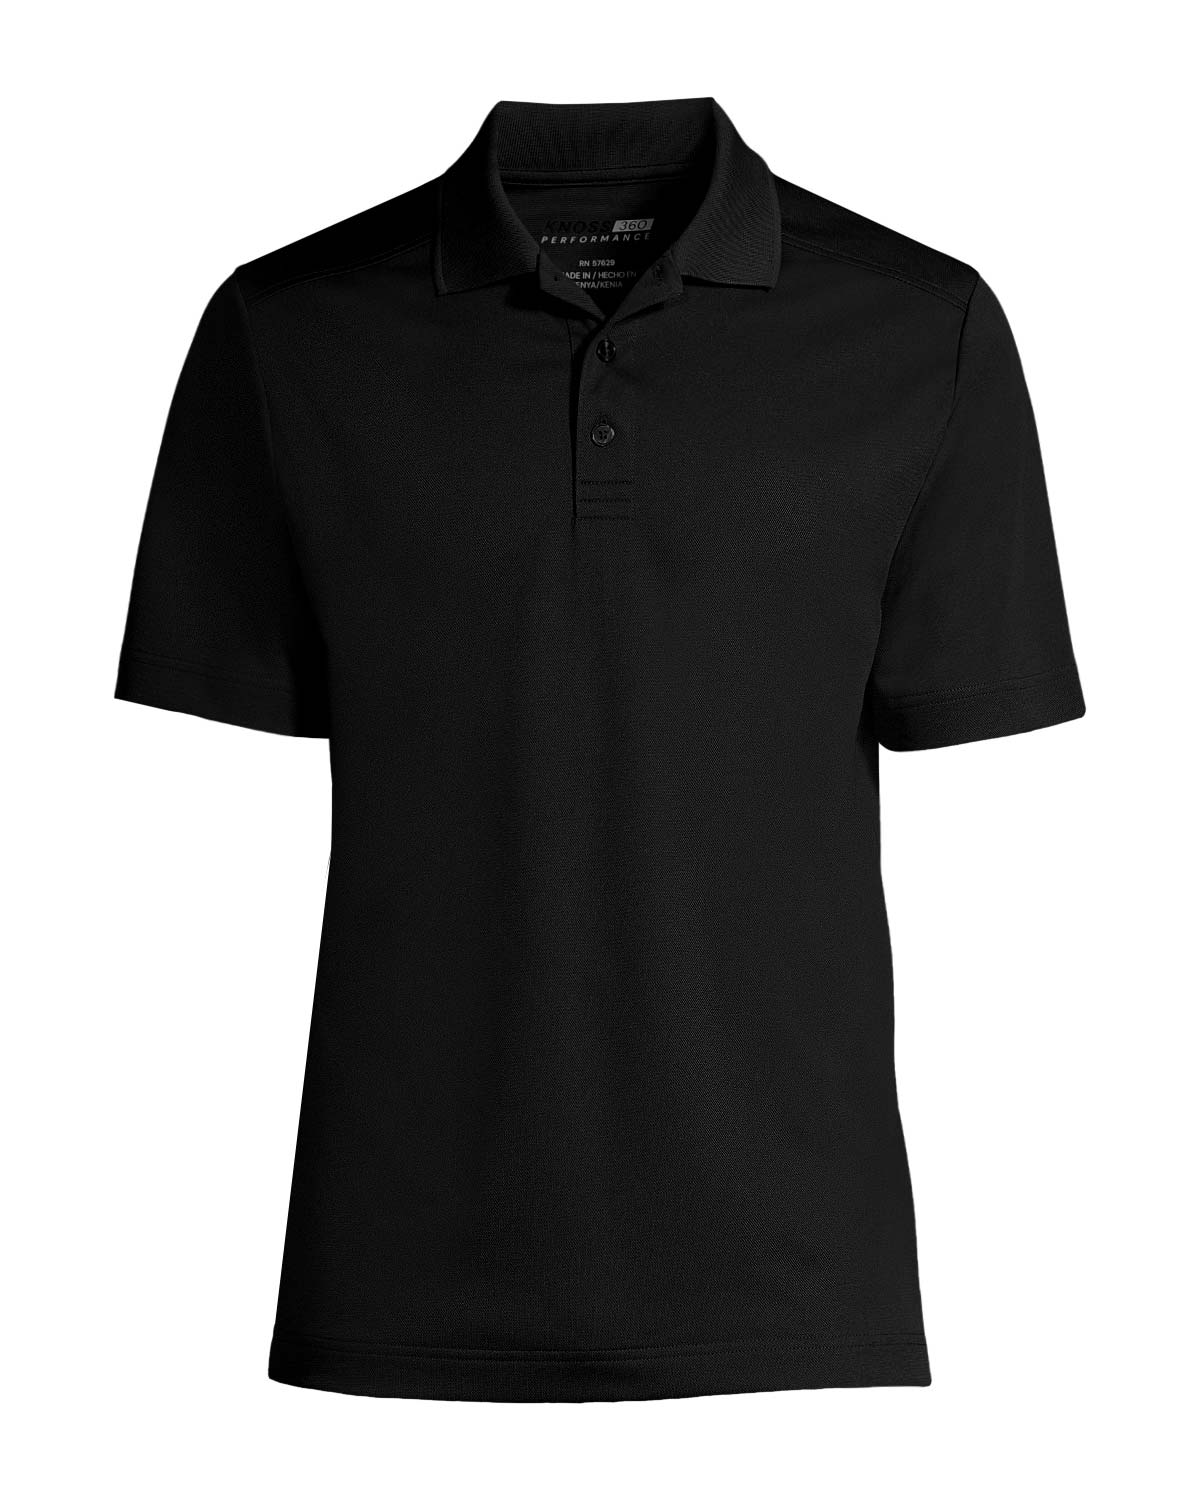 – Proof KNOSS Performance Polo ICON Apparel Men\'s Snag